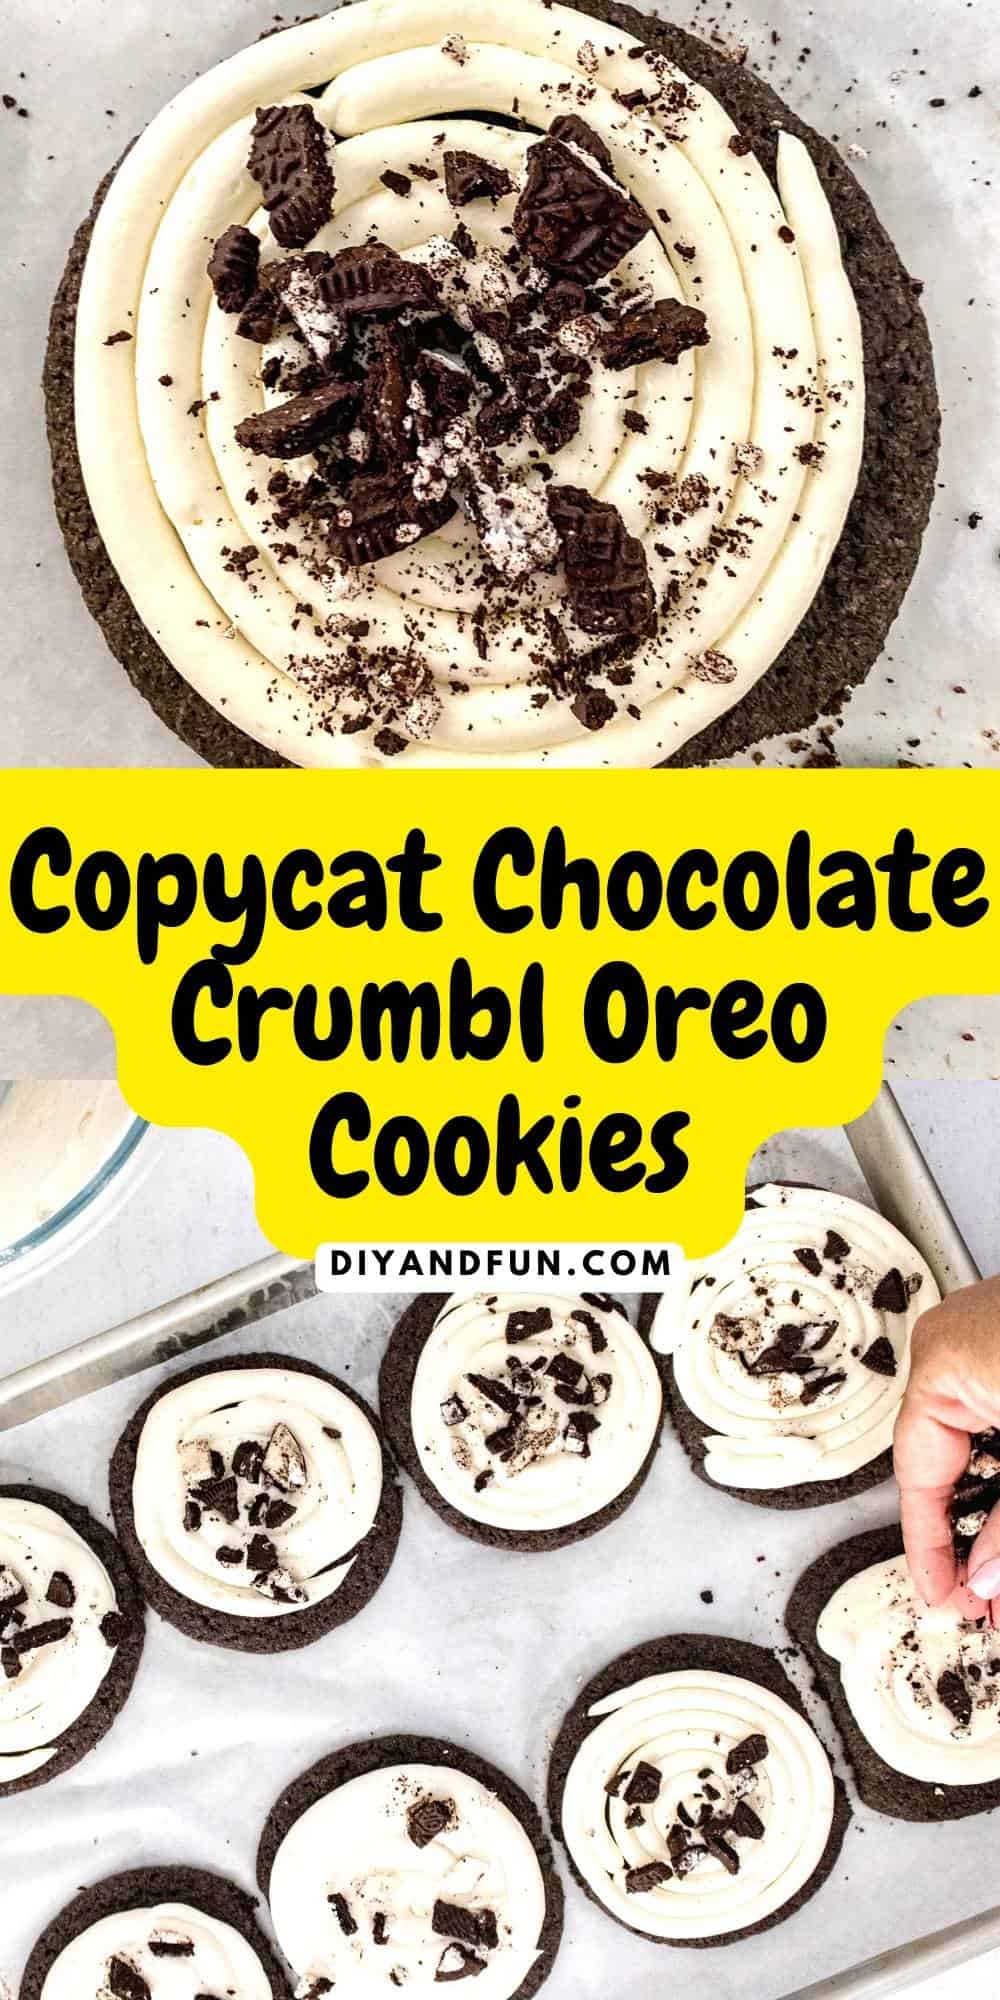 Copycat Chocolate Crumbl Oreo Cookies, a tasty recipe idea for cookies that have been inspired by popular Bakery Style Cookies.